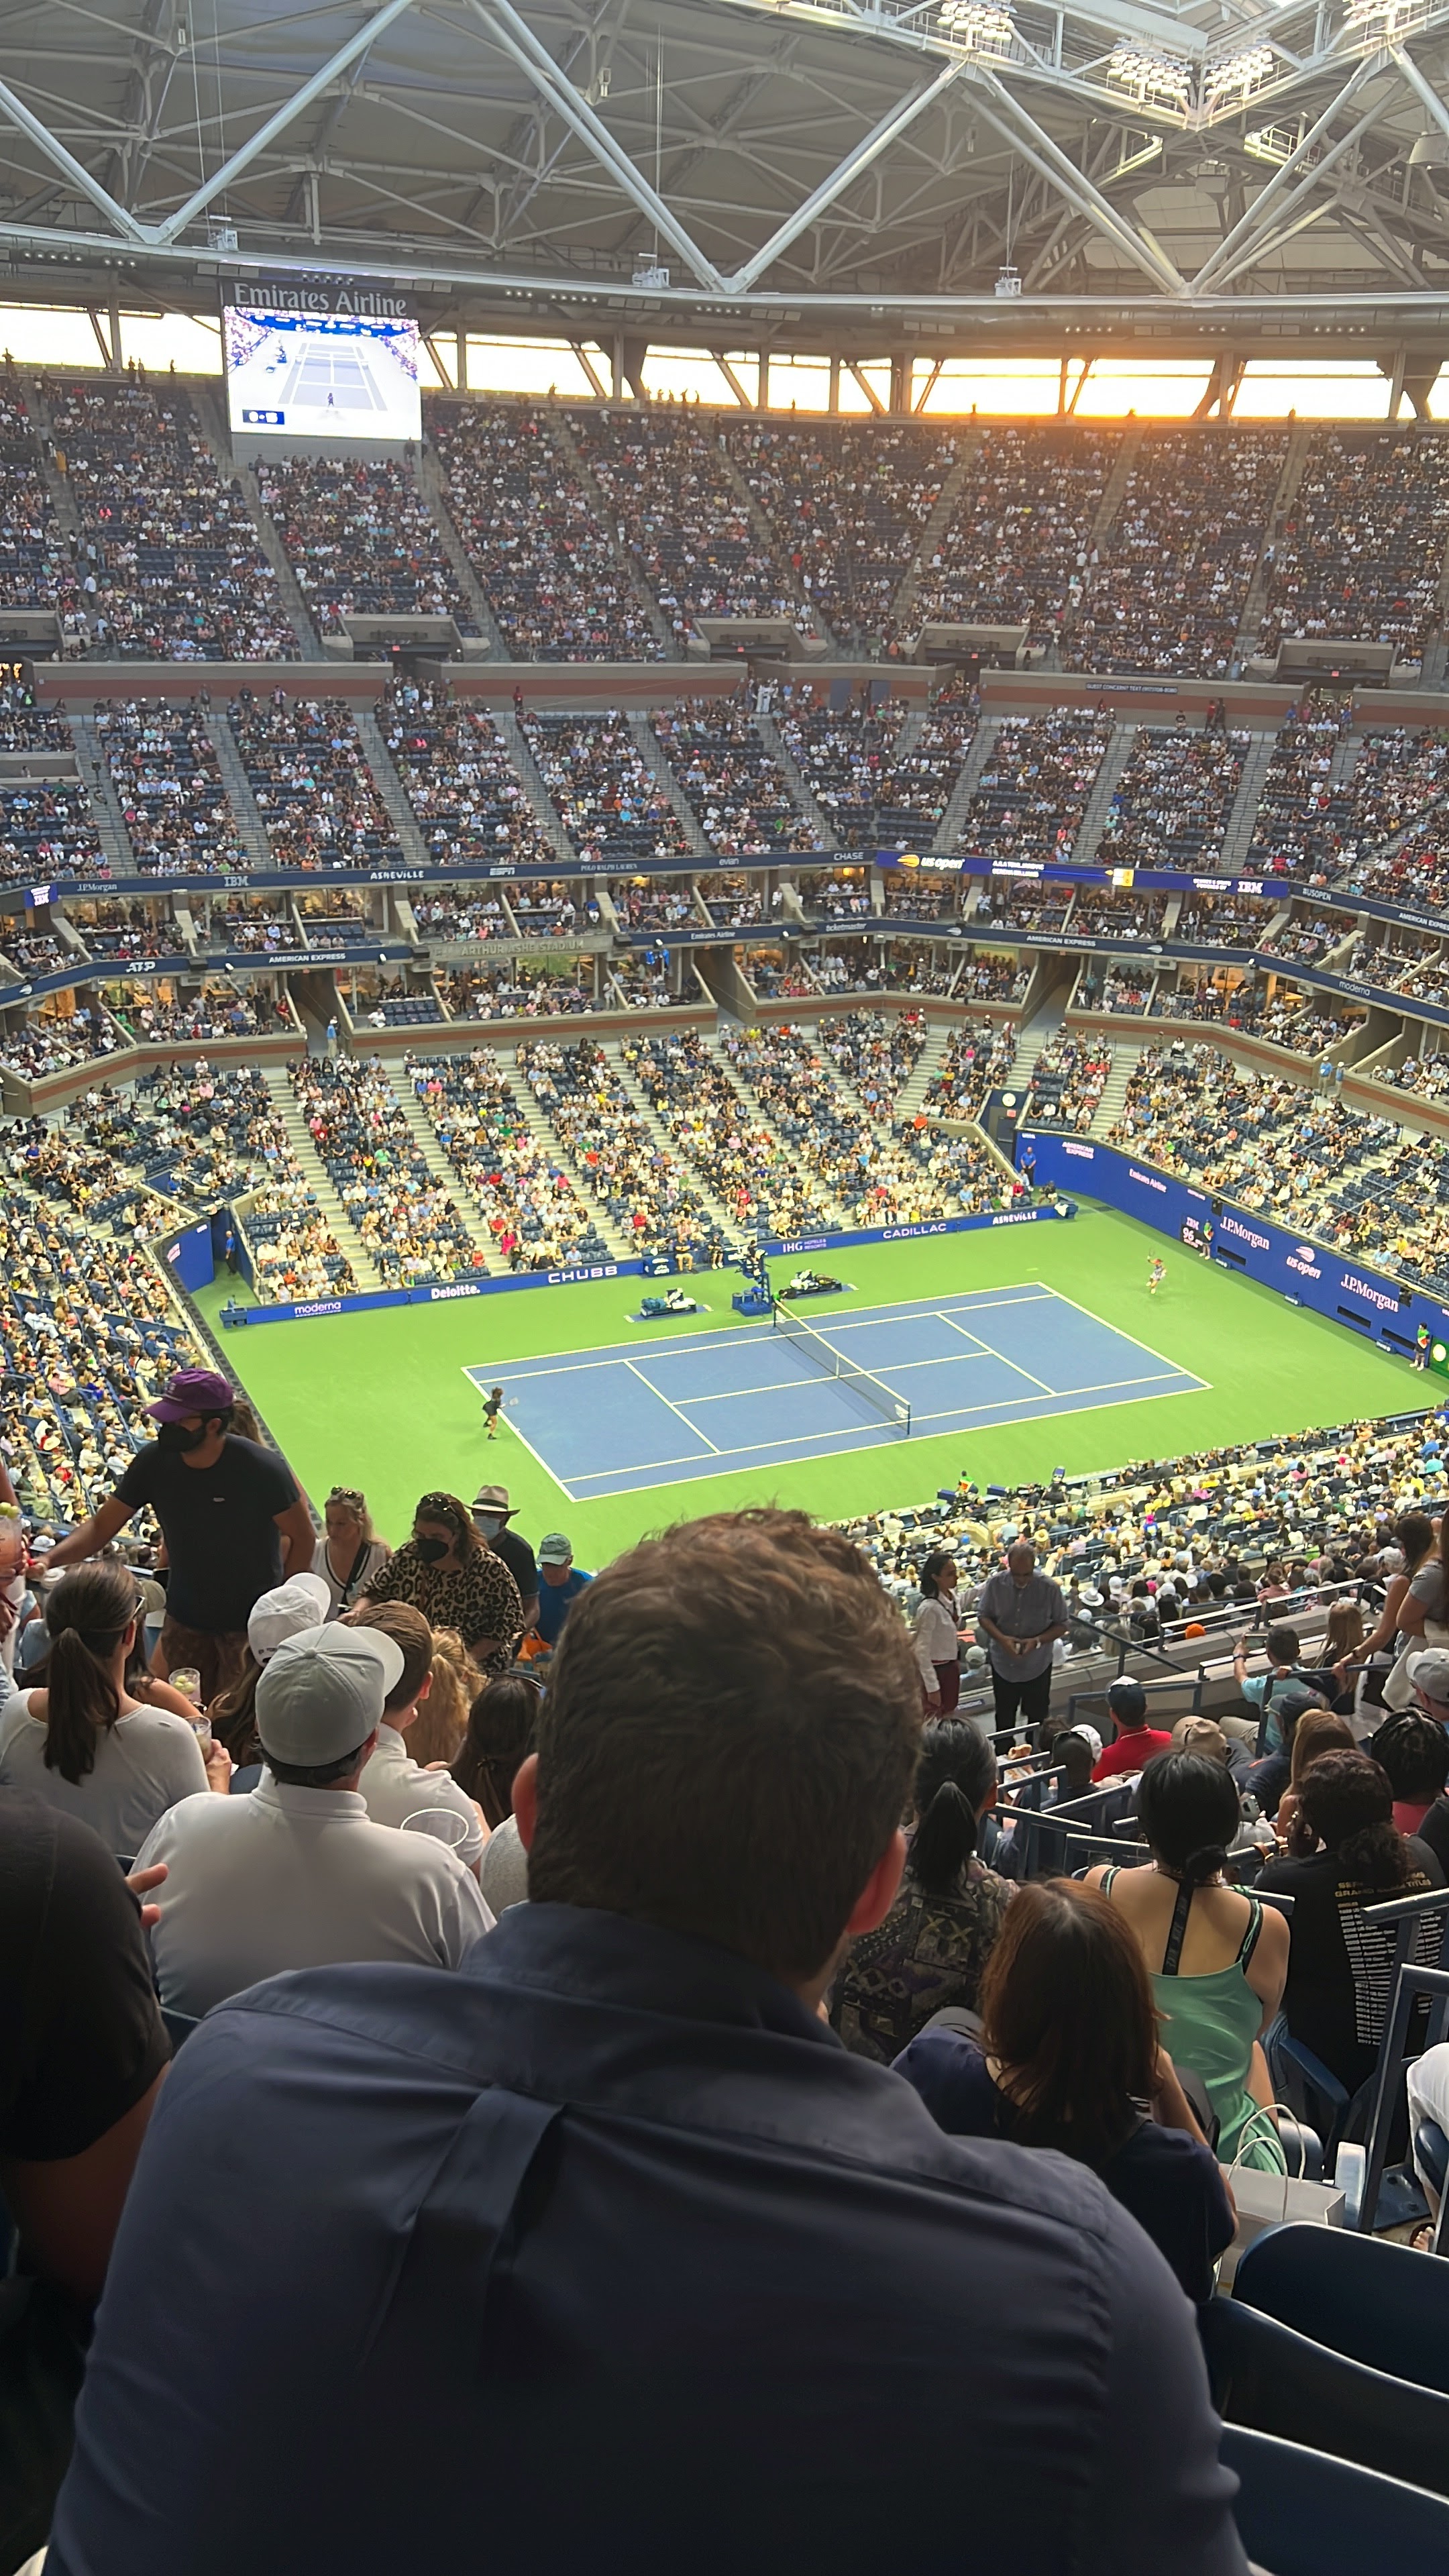 us open, serena williams, tennis match, us open tennis, williams sisters